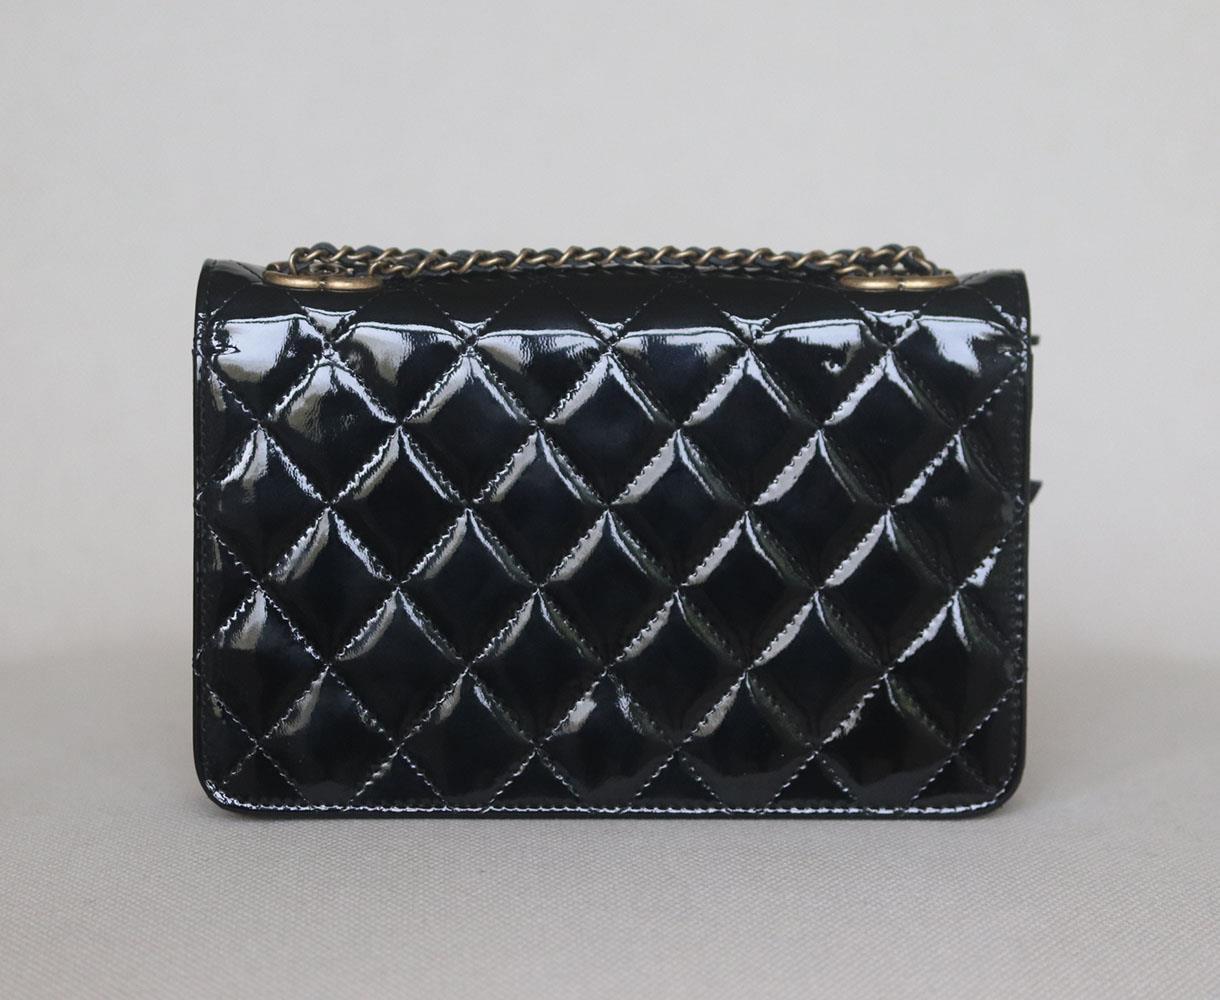 Black Chanel Quilted Patent Leather Wallet On Chain Crossbody Bag